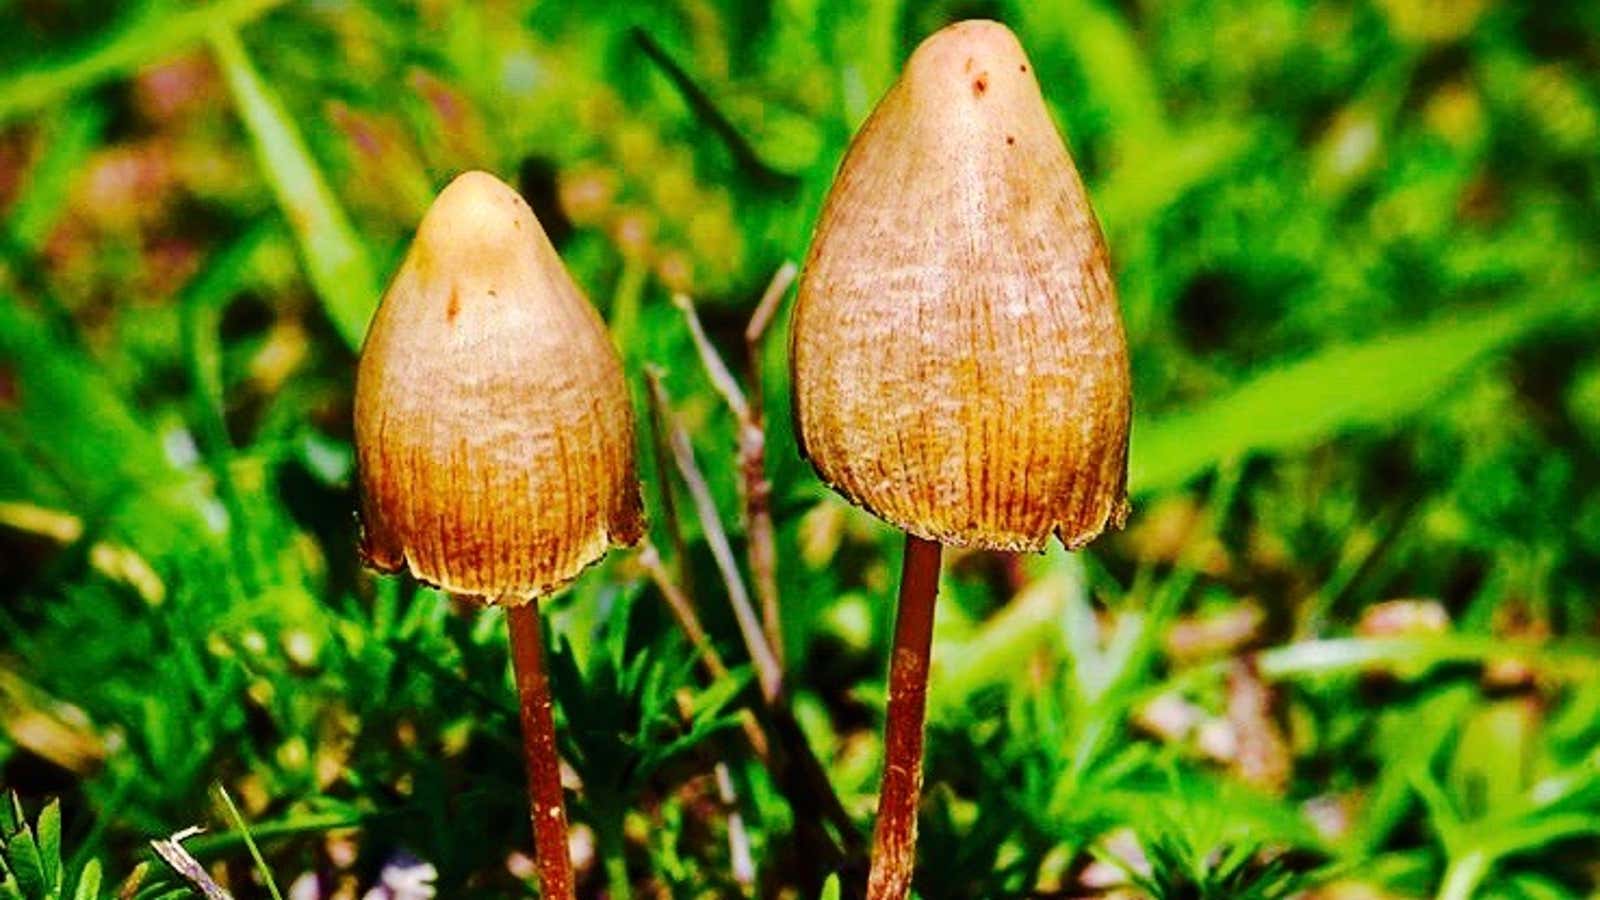 This mushroom contains properties that can help you sense your relationship to this mushroom.